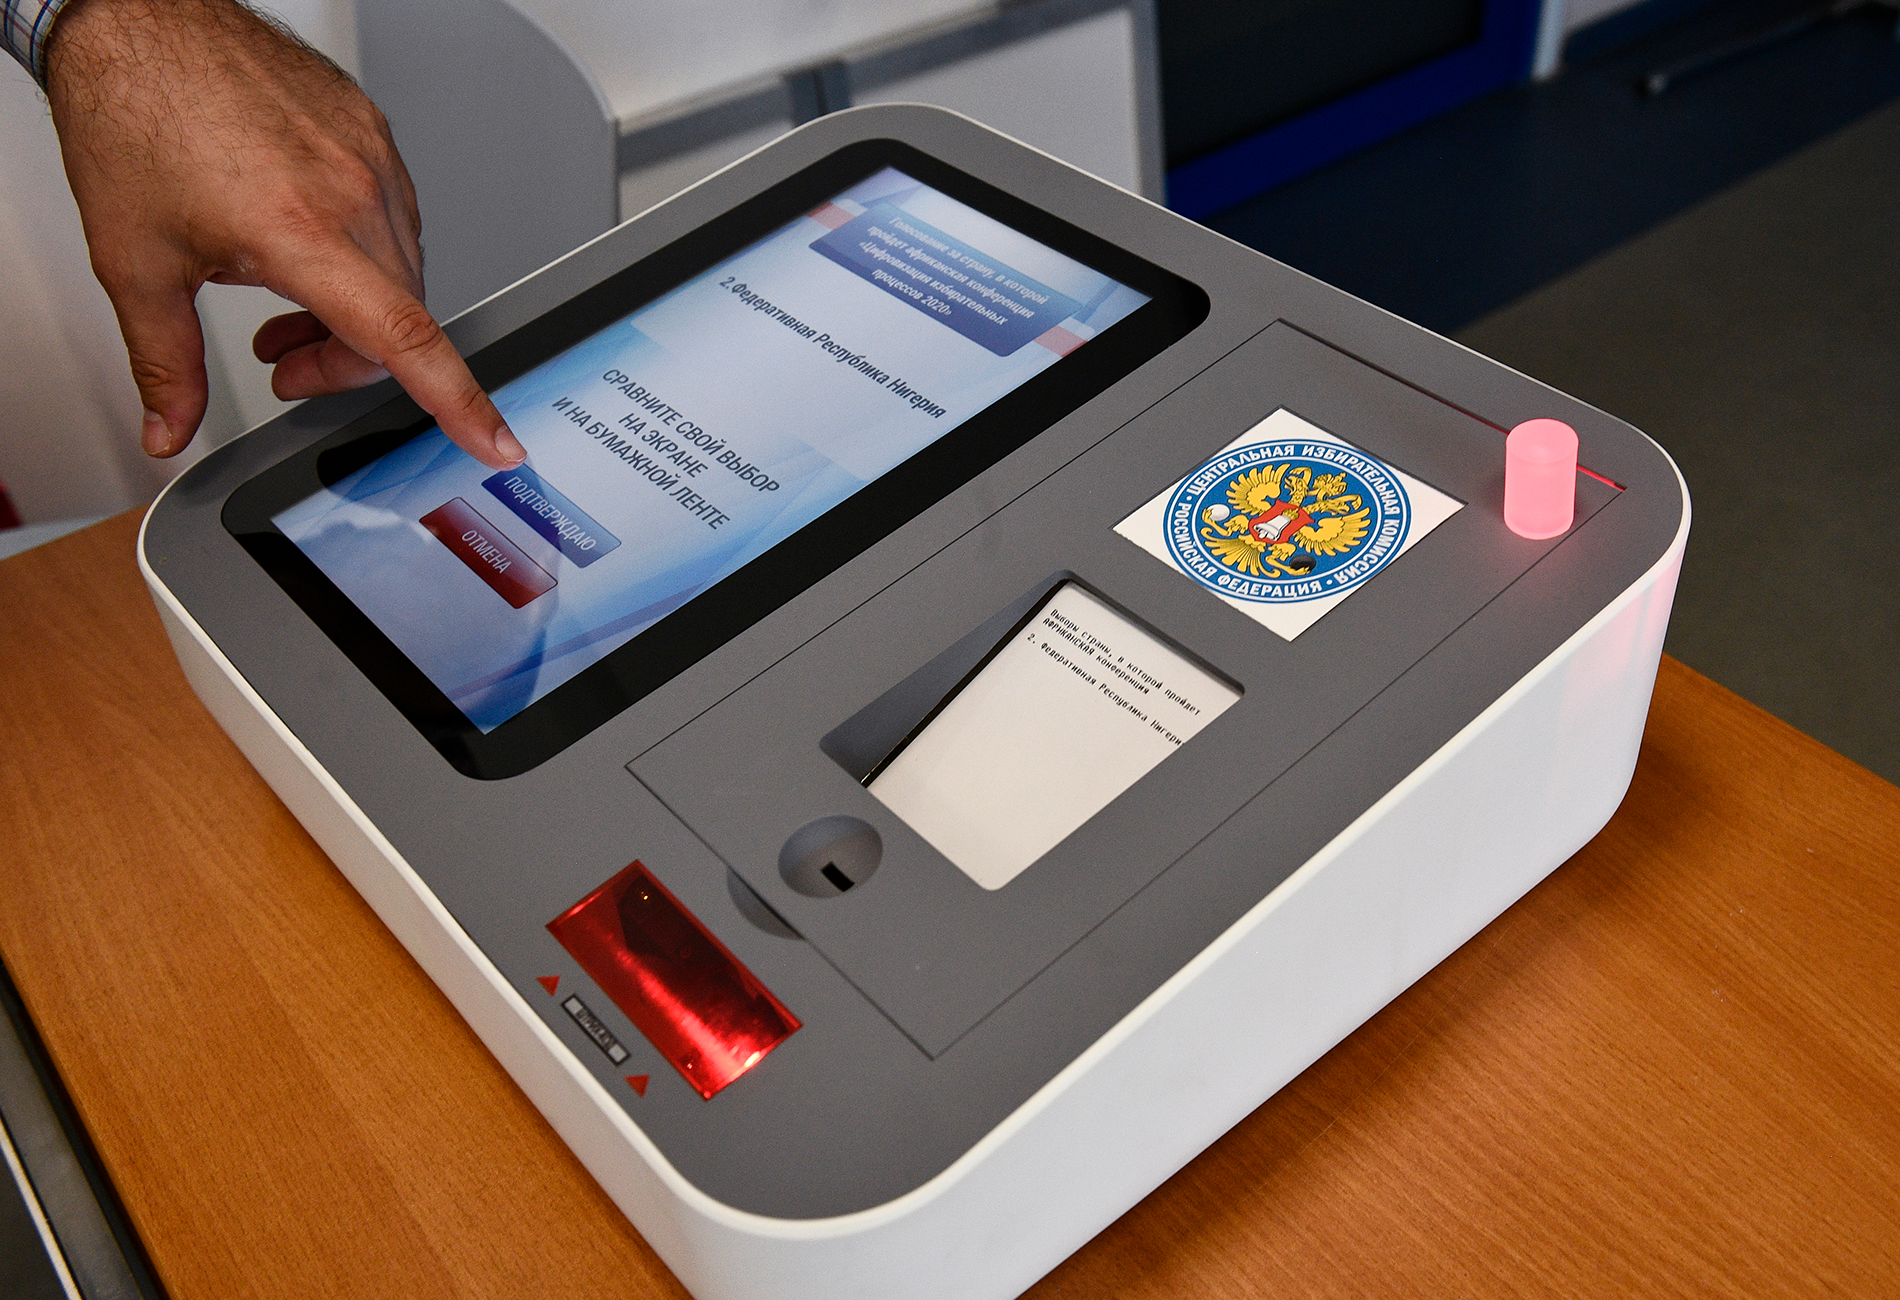 CEC informed about the attacks on e-voting portal